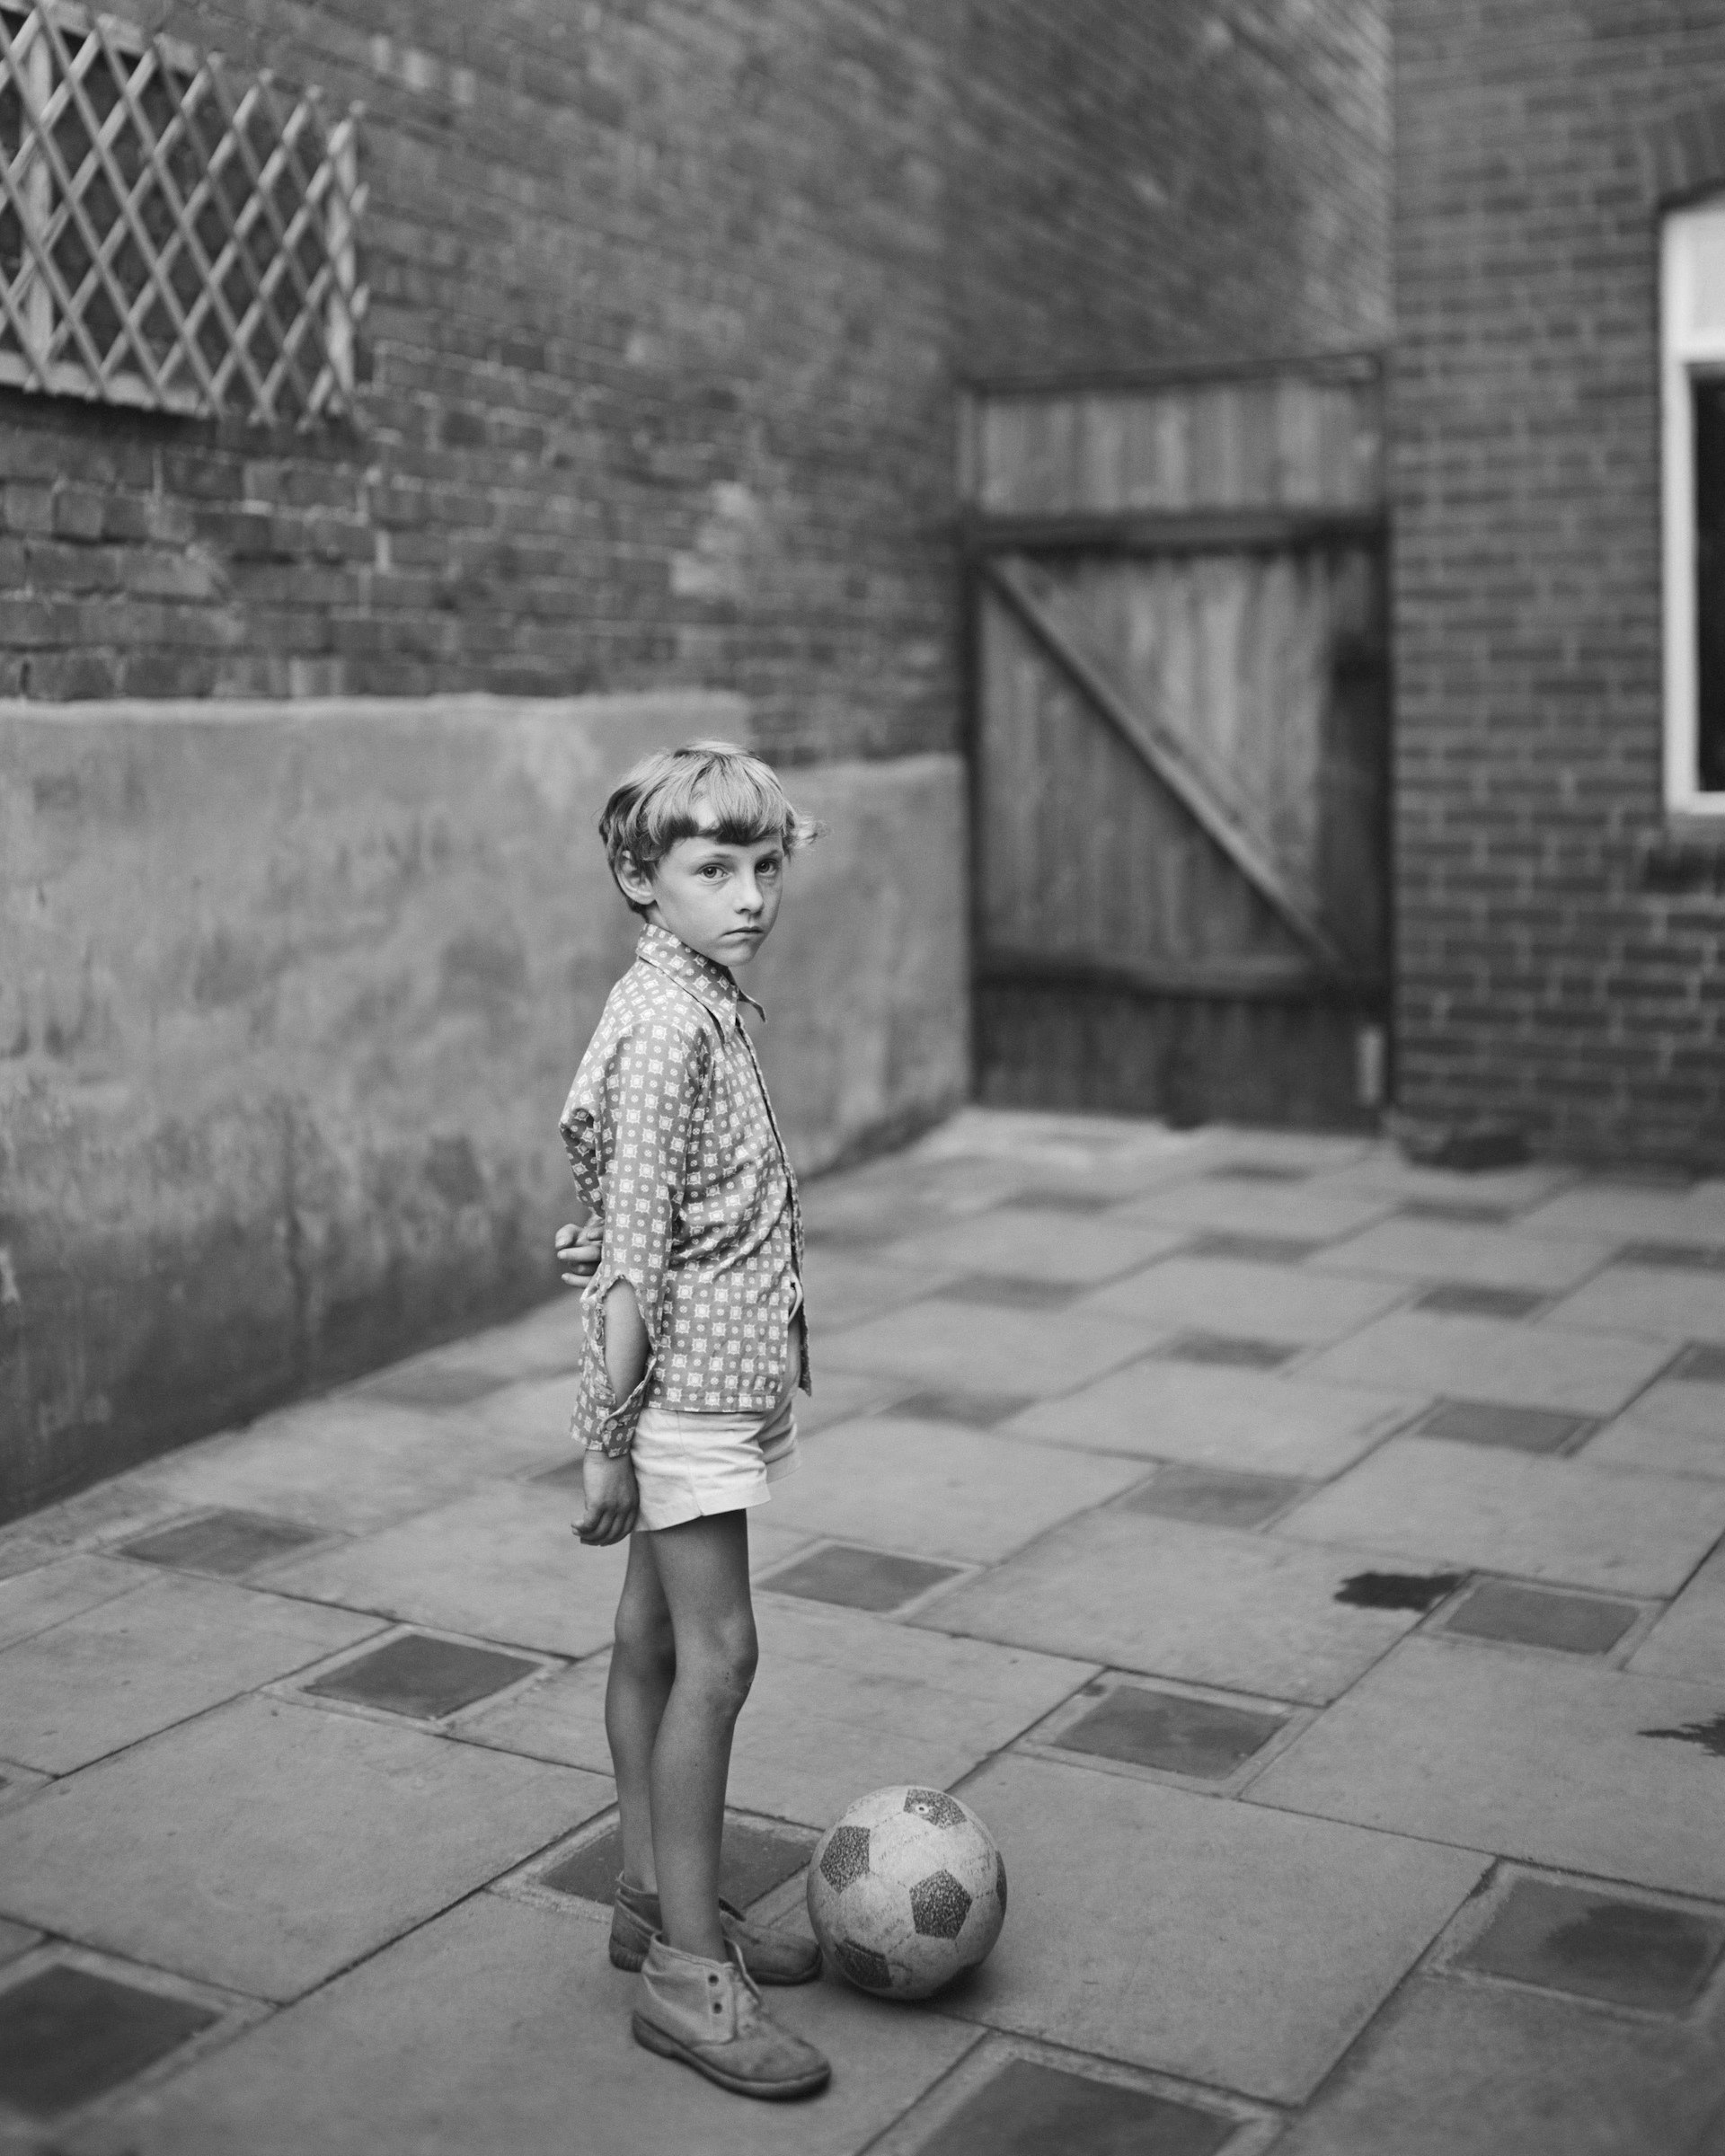 Young boy with ball, 1974